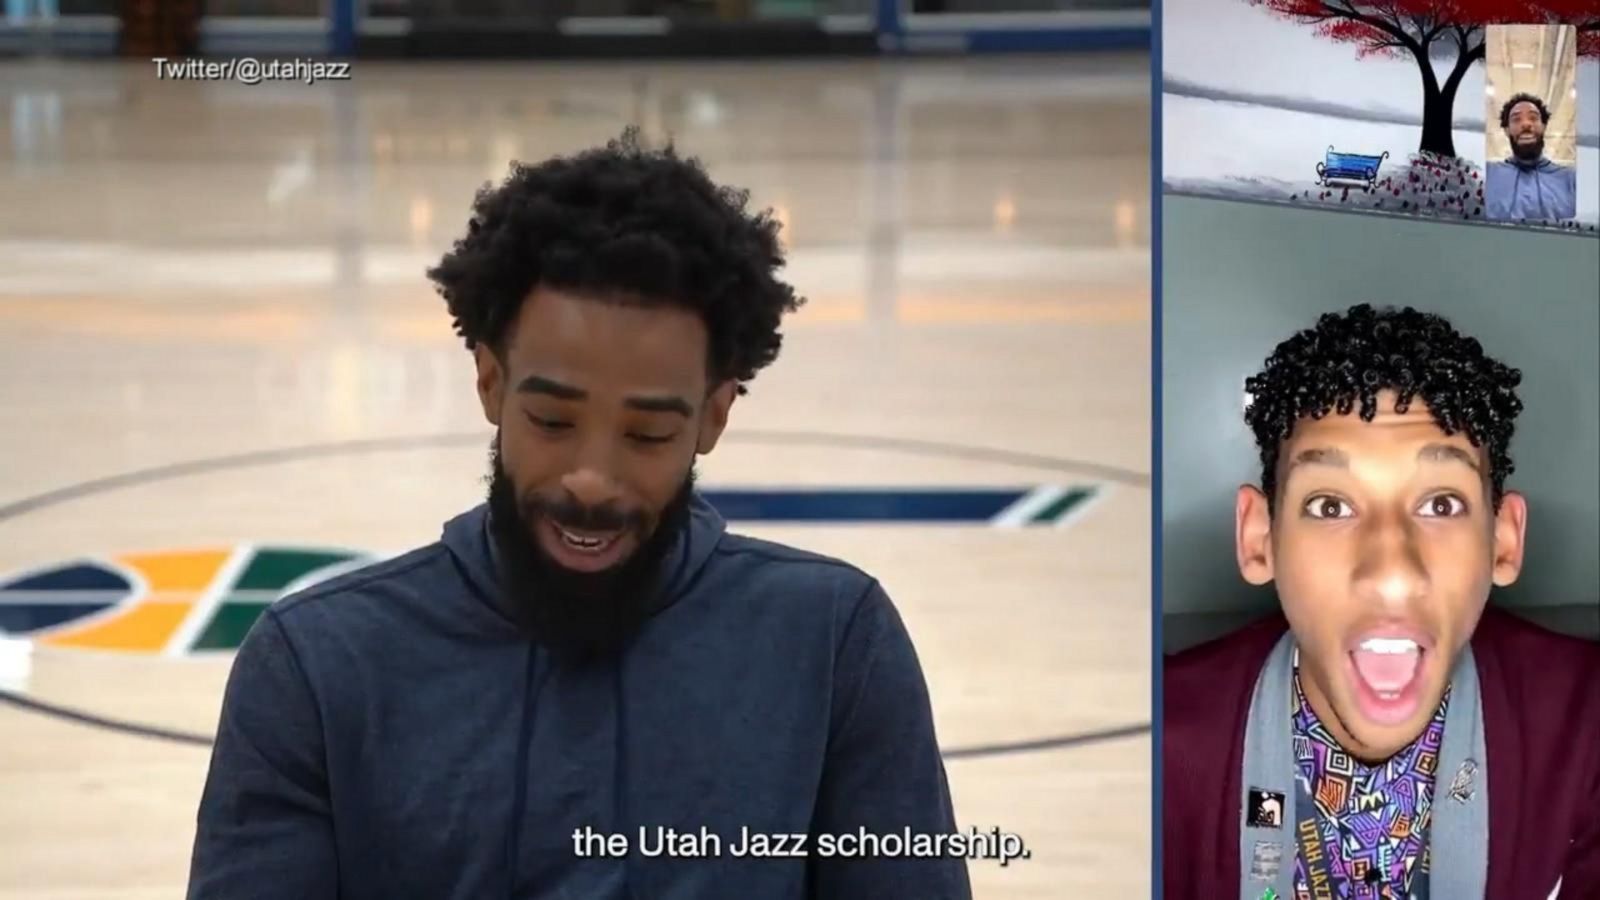 Utah Jazz players surprises students with scholarships - Good Morning ...